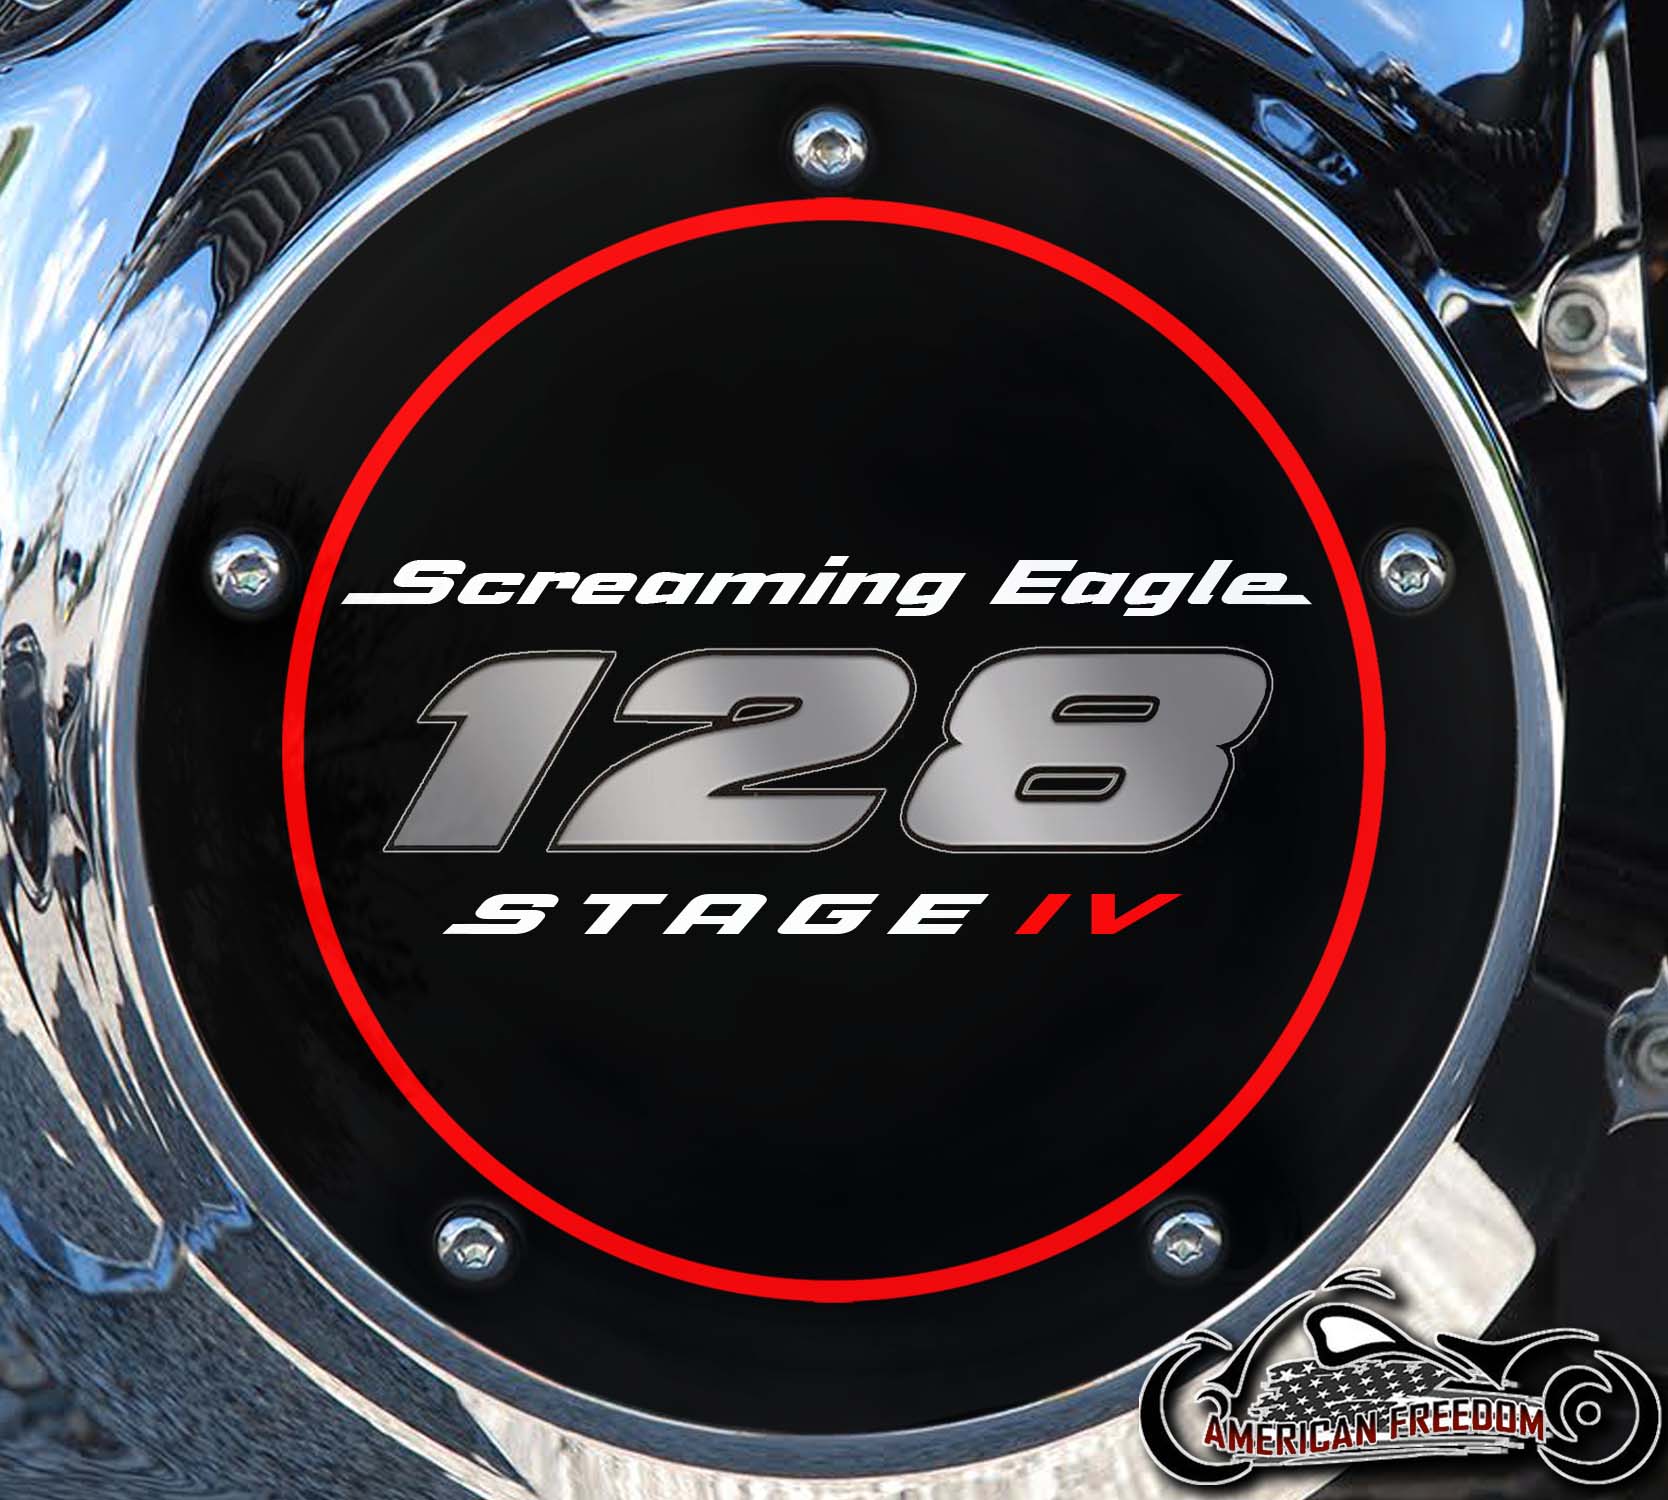 Screaming Eagle Stage IV 128 Derby Cover O/L